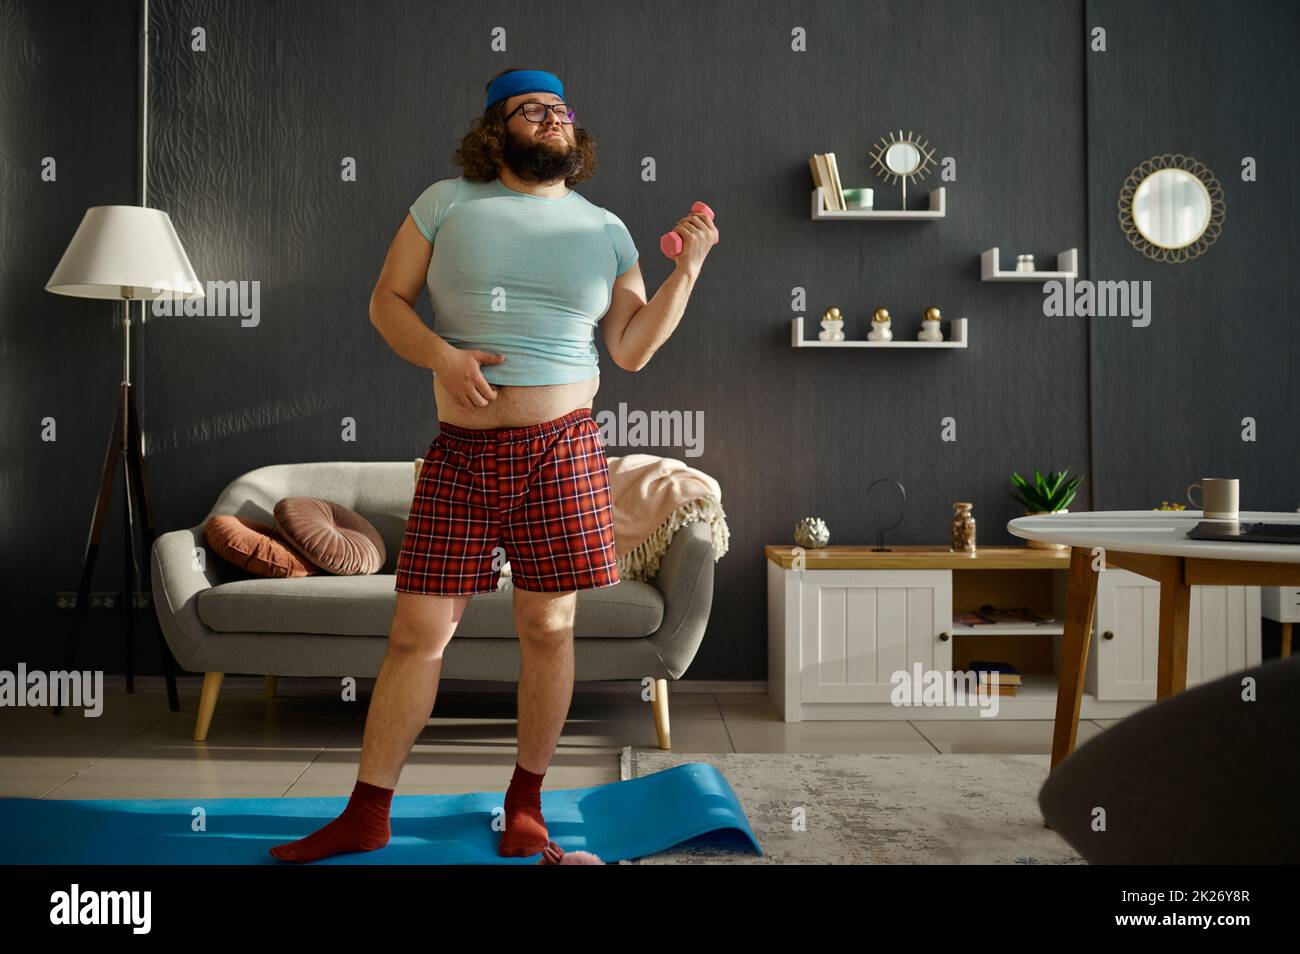 Funny man doing morning workout with dumbbells Stock Photo